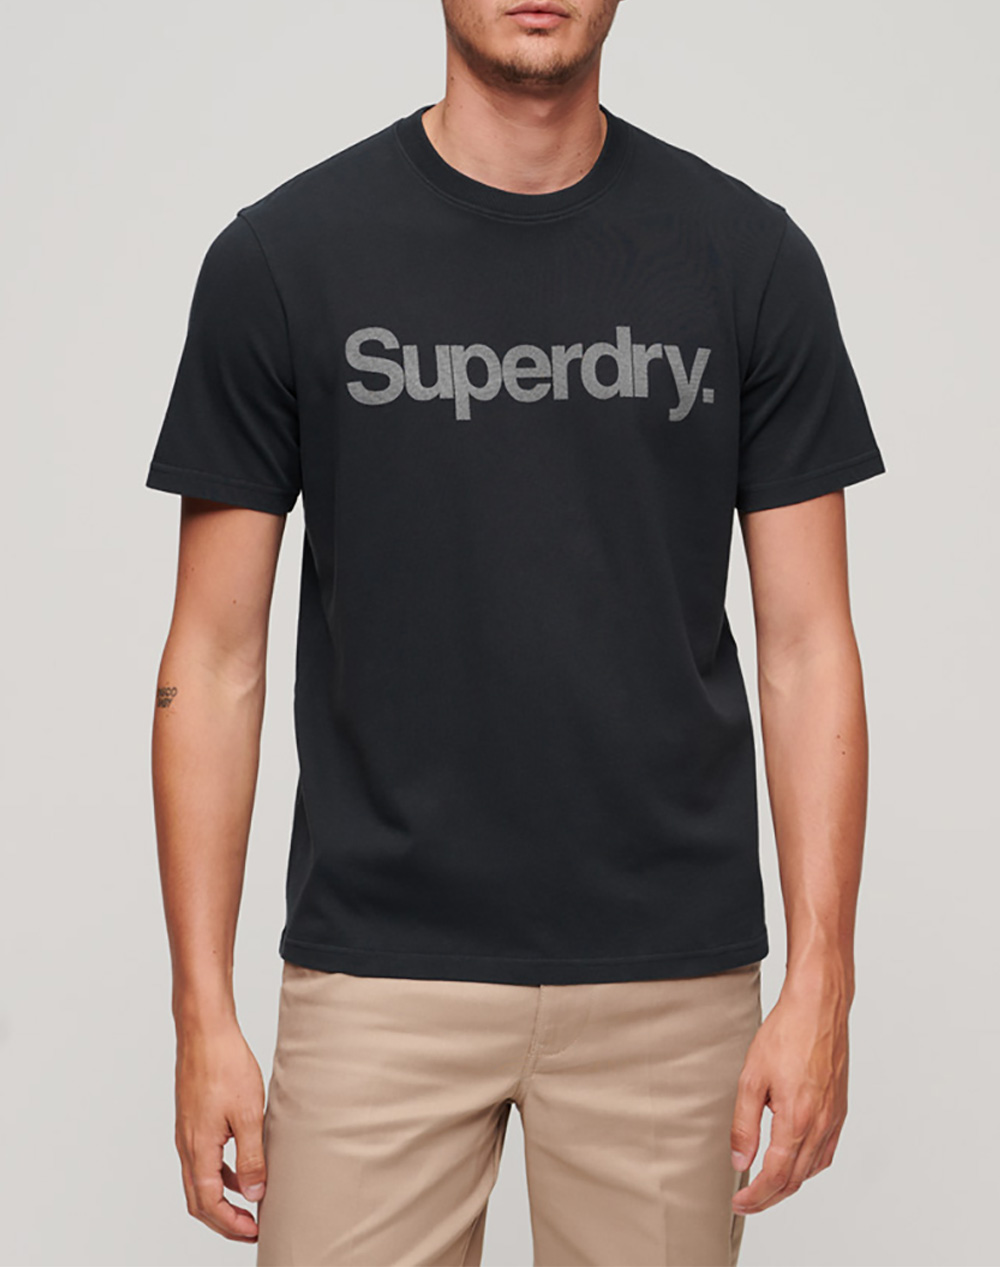 SUPERDRY D1 SDCD CORE LOGO CITY LOOSE TEE ΜΠΛΟΥΖΑ ΑΝΔΡΙΚΟ M1011928A-98T MidnightBlue 3820ASUPE3400324_XR01739